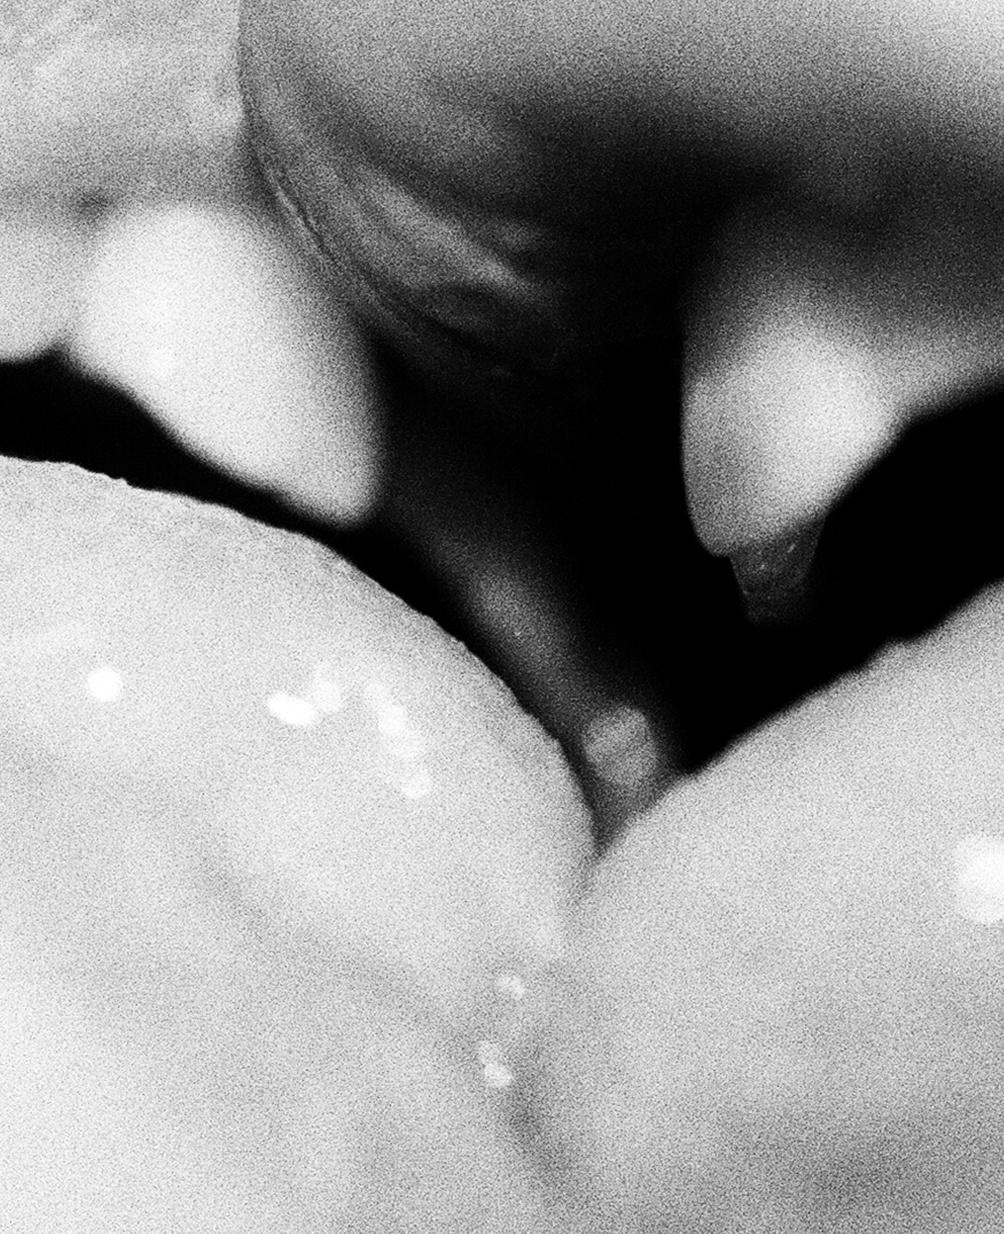 Untitled (Diary) – Lina Scheynius, Black and White, Woman, Kiss, Lips, Erotic For Sale 4